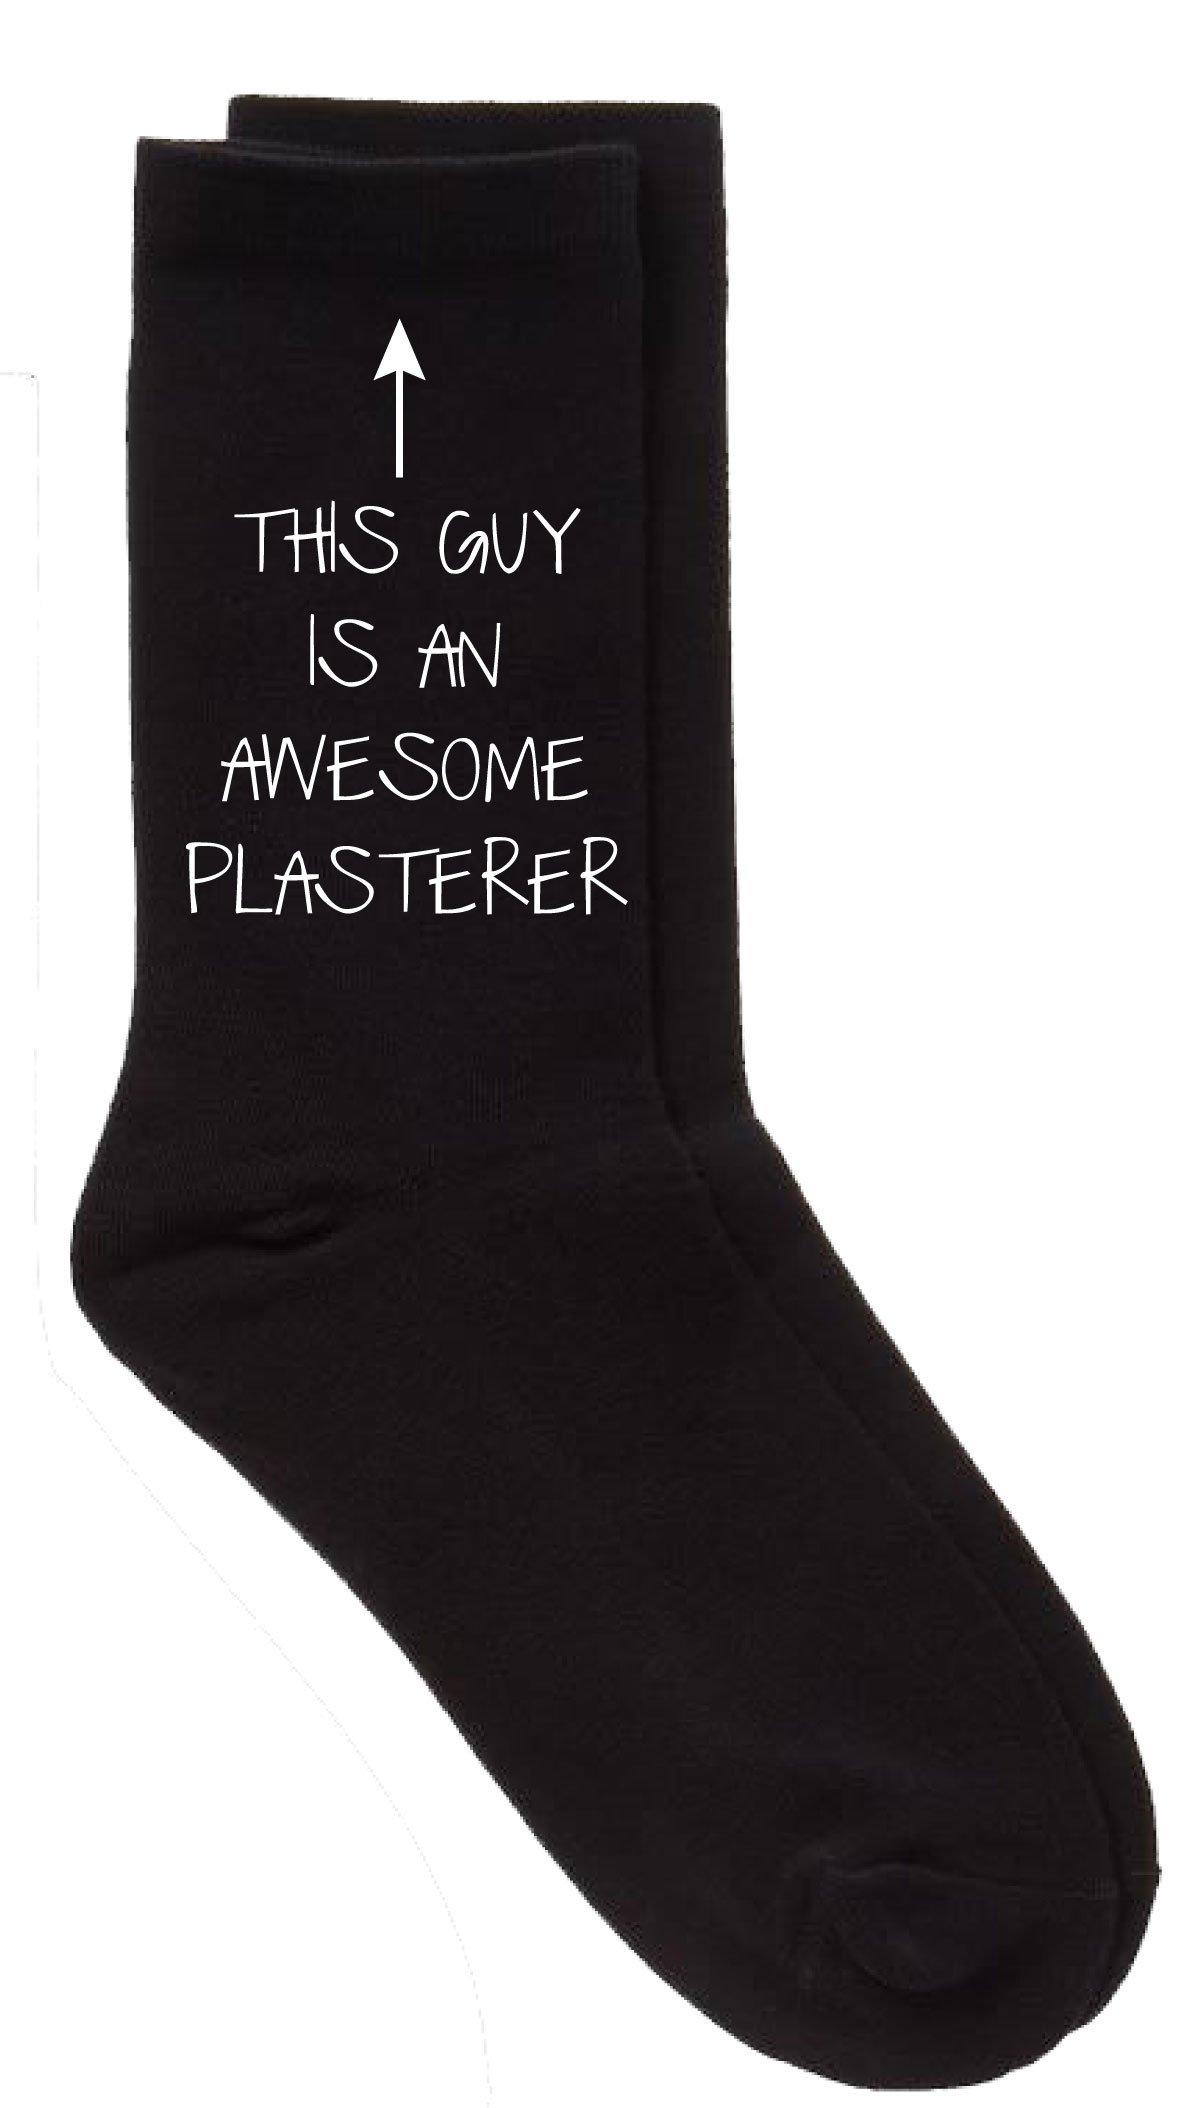 This Guy Is An Awesome Plasterer Mens Black Socks